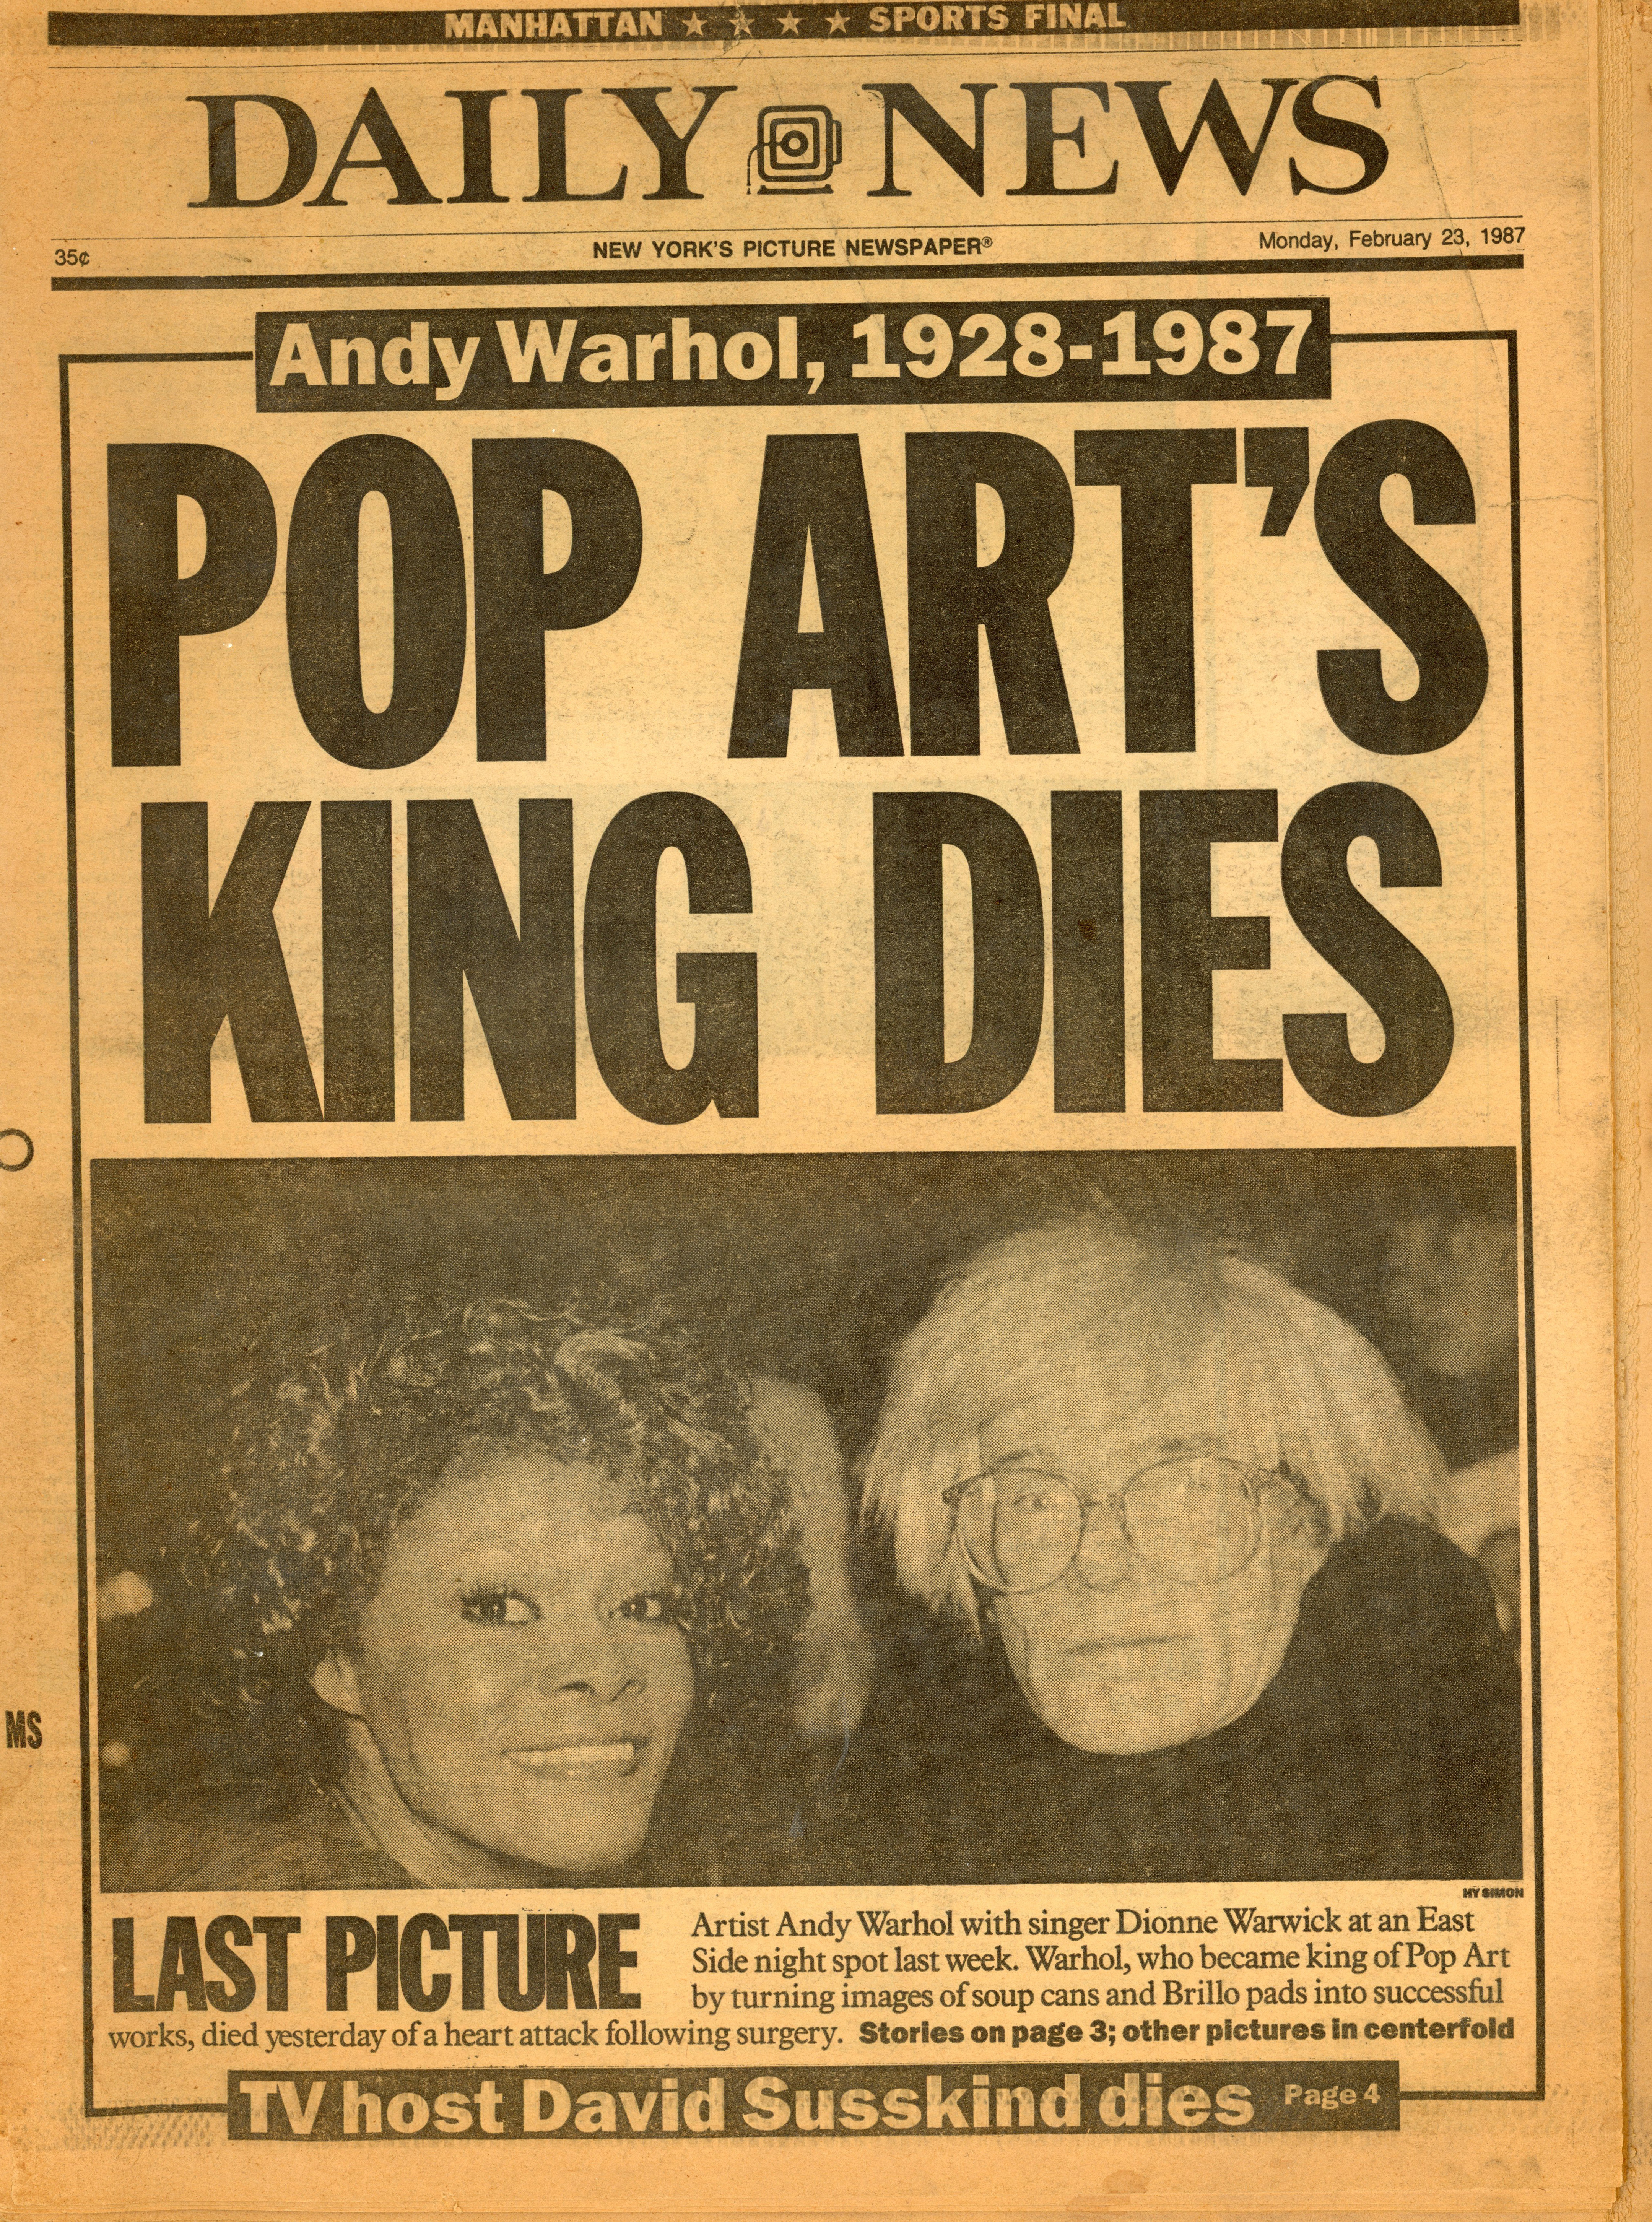 https://gallery98.org/wp-content/uploads/2023/09/Andy-Warhol-Daily-News.jpg